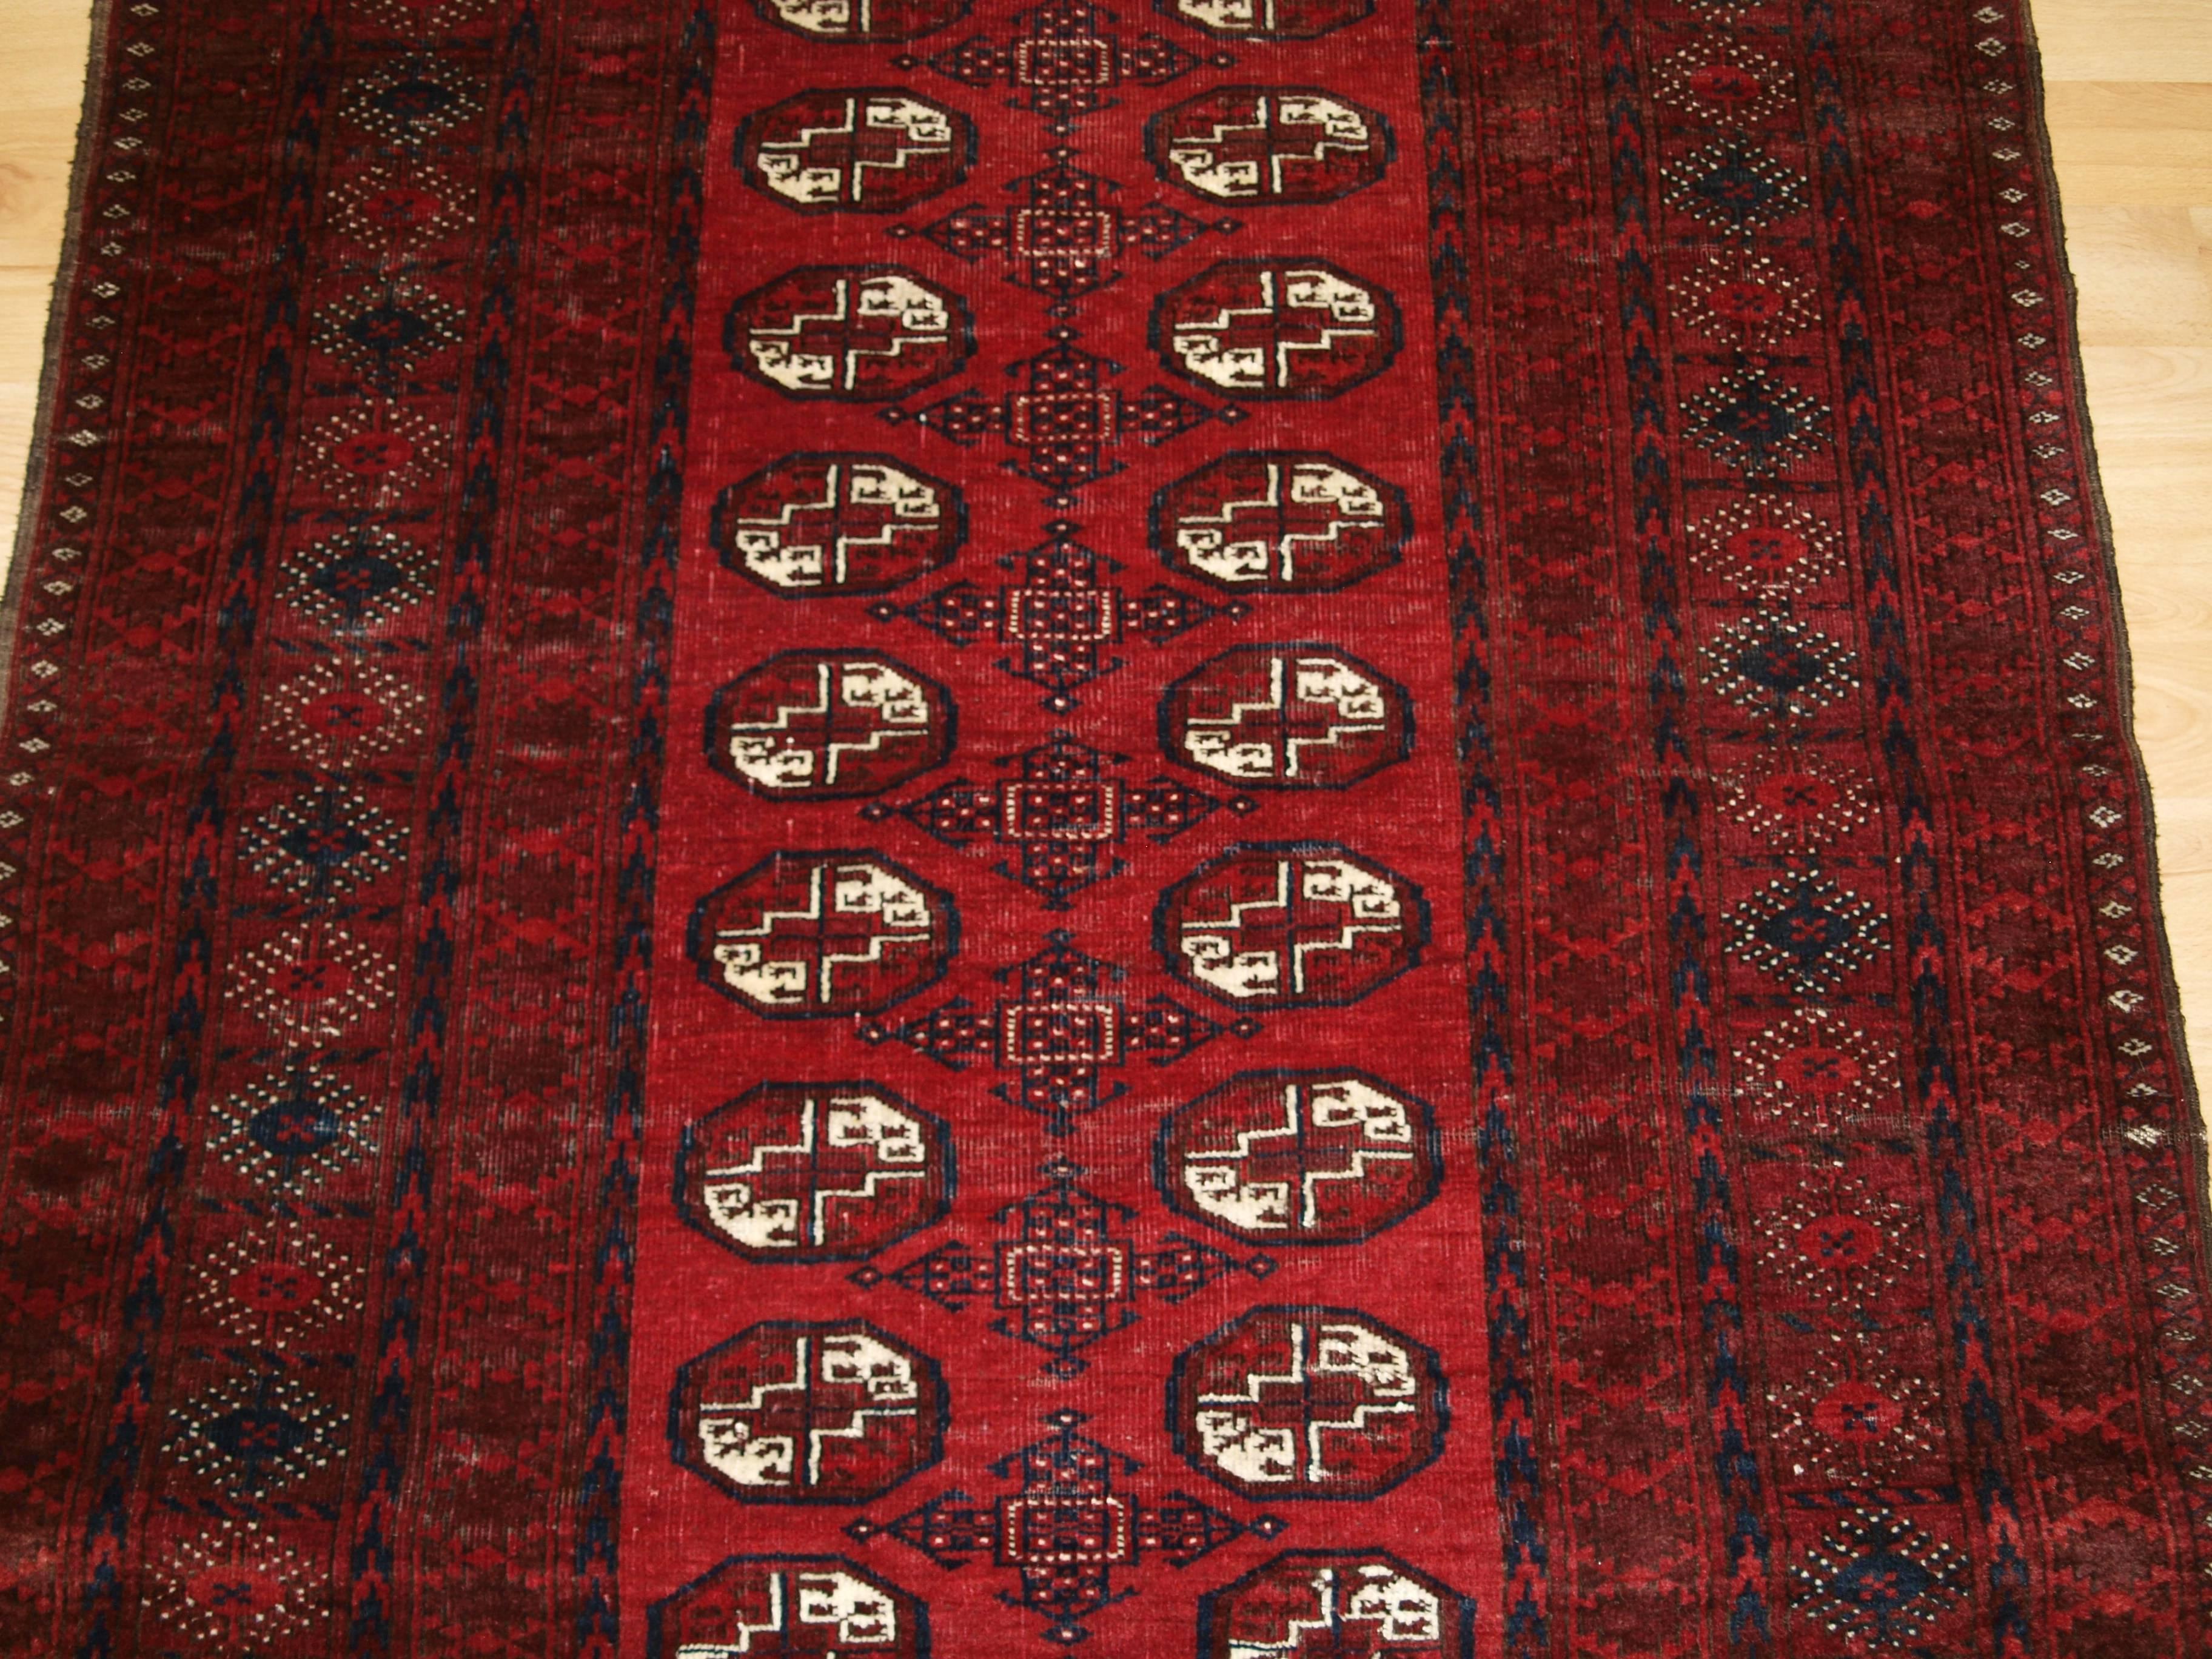 Old Afghan village rug, traditional design, rich colors, hard wearing, circa 1920.
Size: 6ft 2in x 4ft 1in (188 x 124cm).

Old Afghan village rug of traditional Turkmen design, the rug is a rich red color,

circa 1920.

The rug is in good